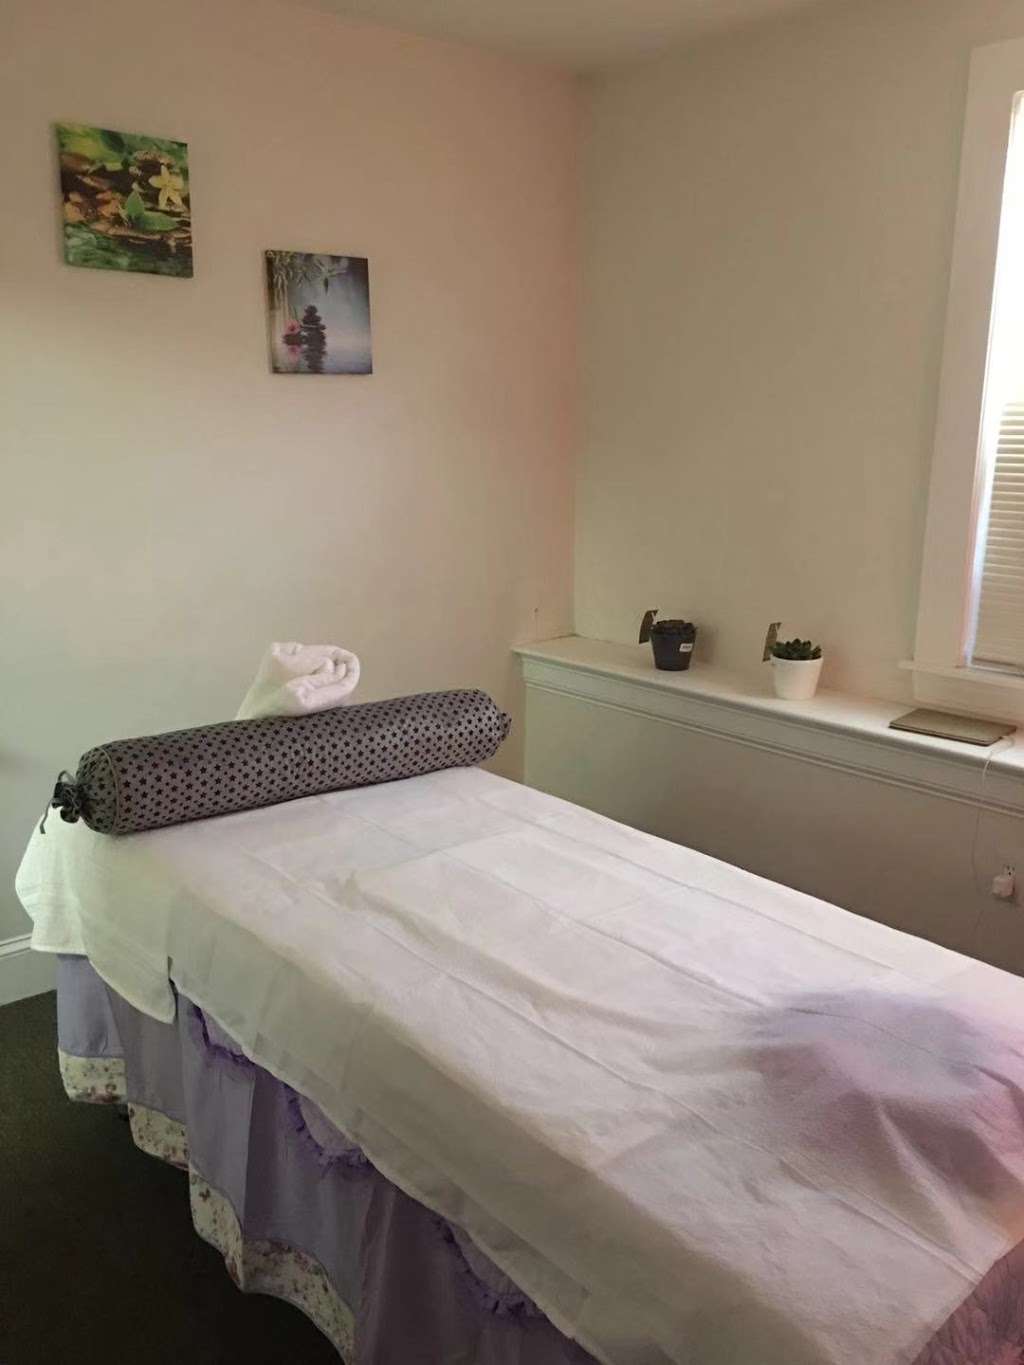 Rosemary Spa(2nd Floor-No Backdoor) | 2 Groton Rd Unit 3, North Chelmsford, MA 01863 | Phone: (978) 221-5592